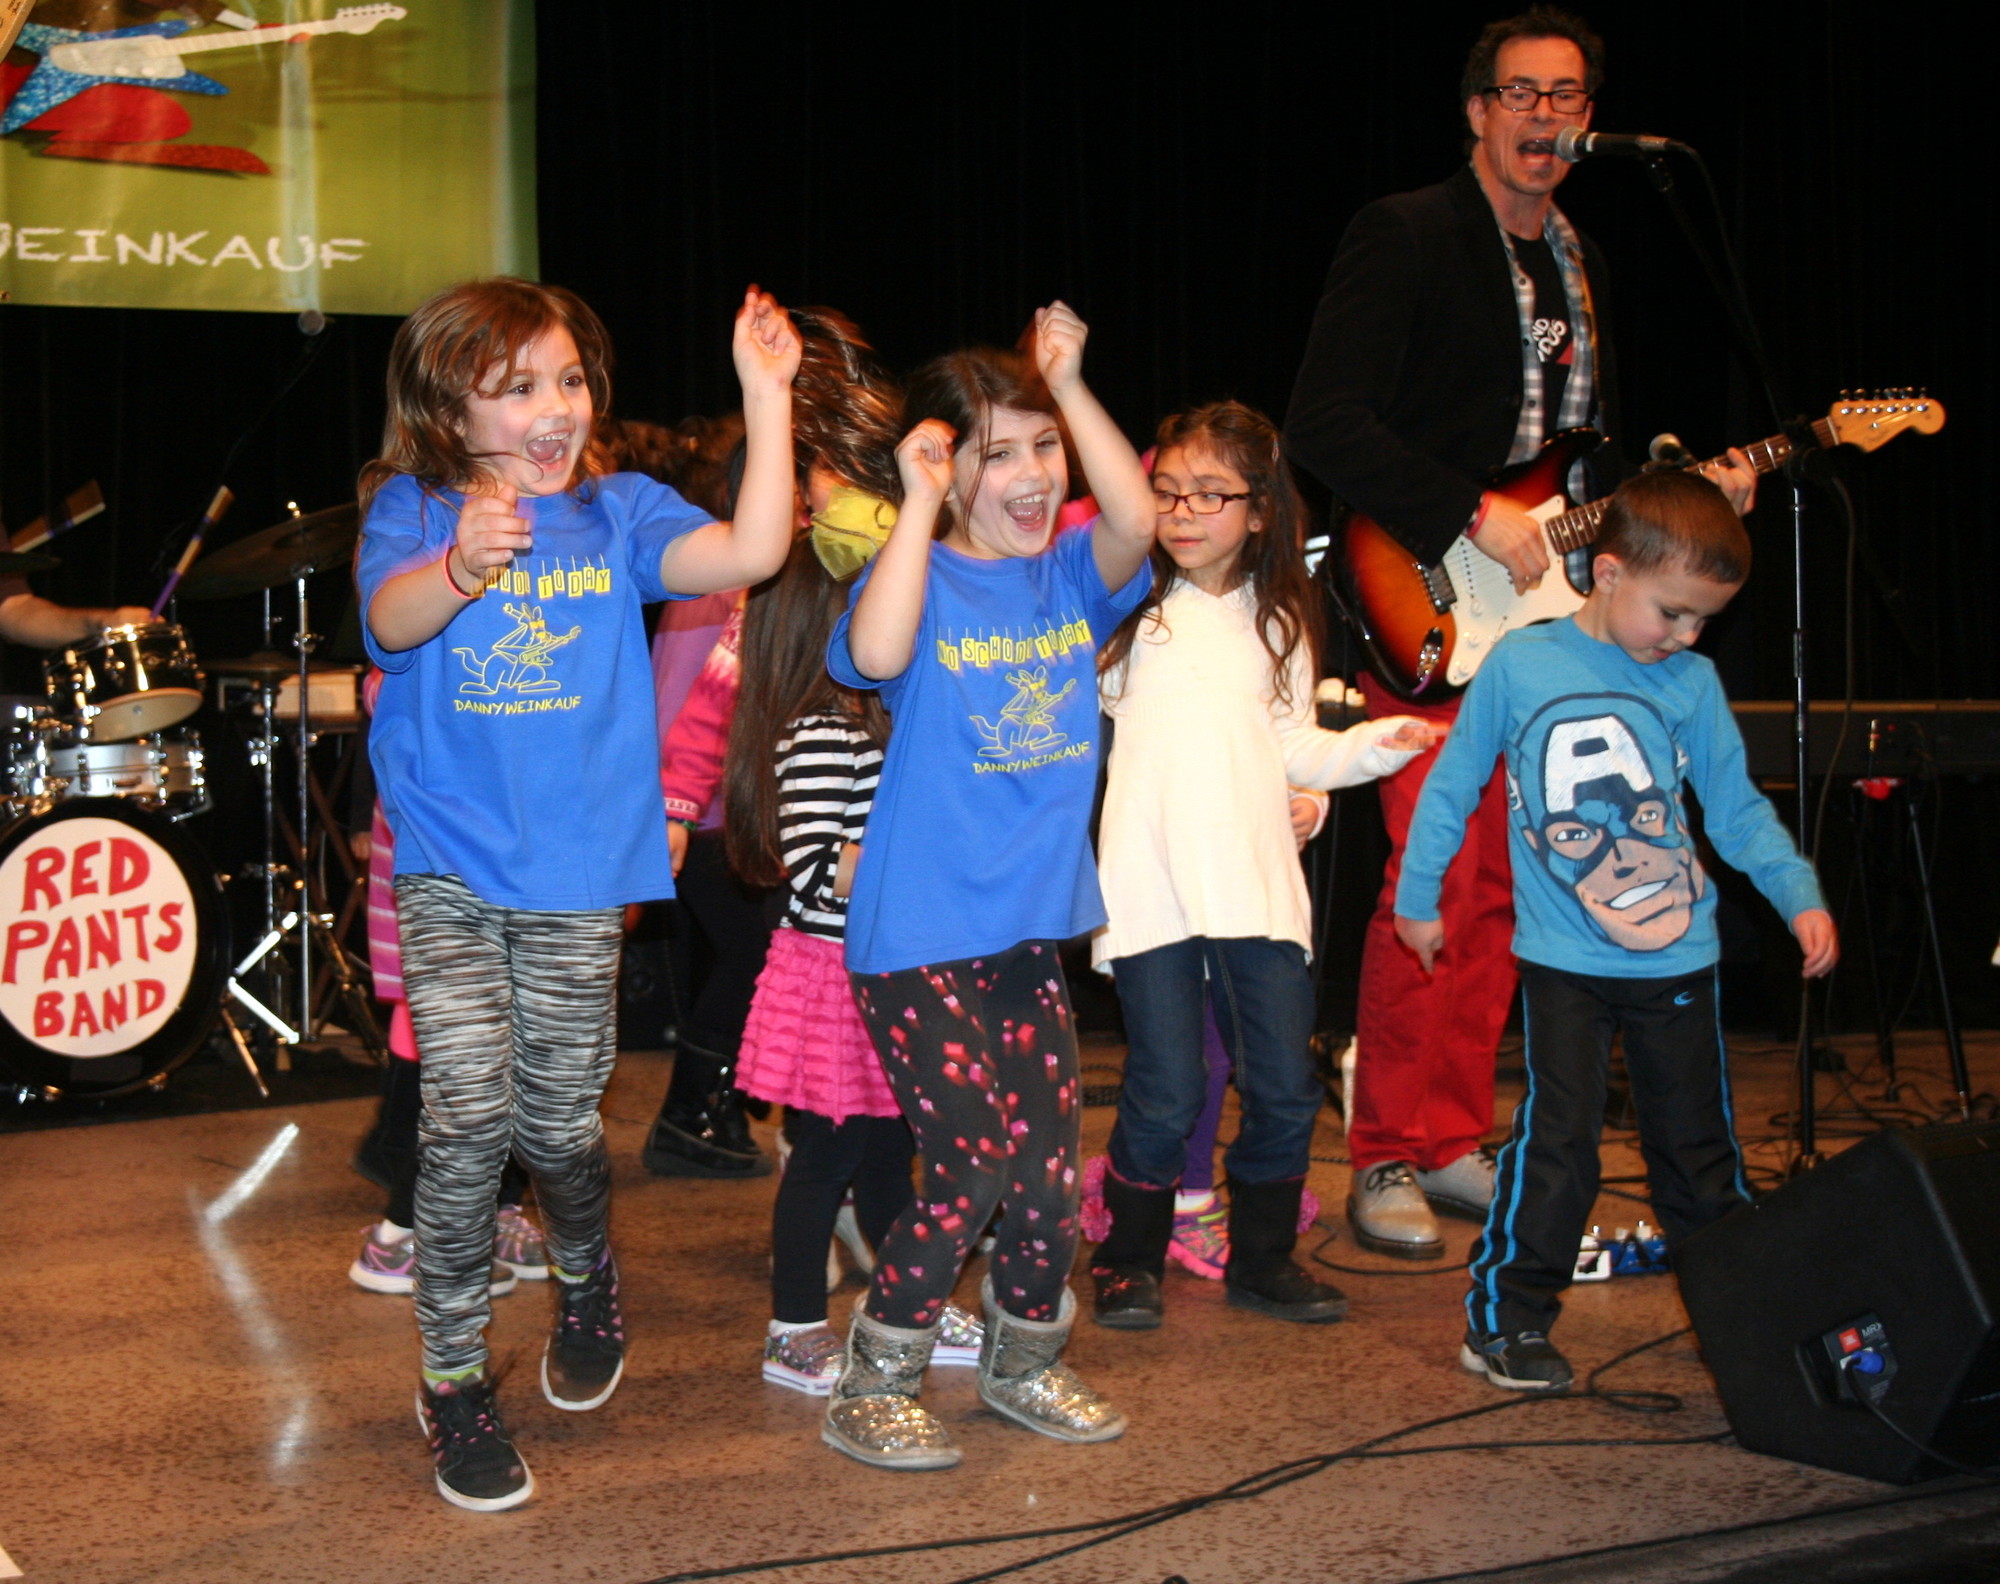 Member of the audience were invited onstage at the Children's Museum in Garden City.